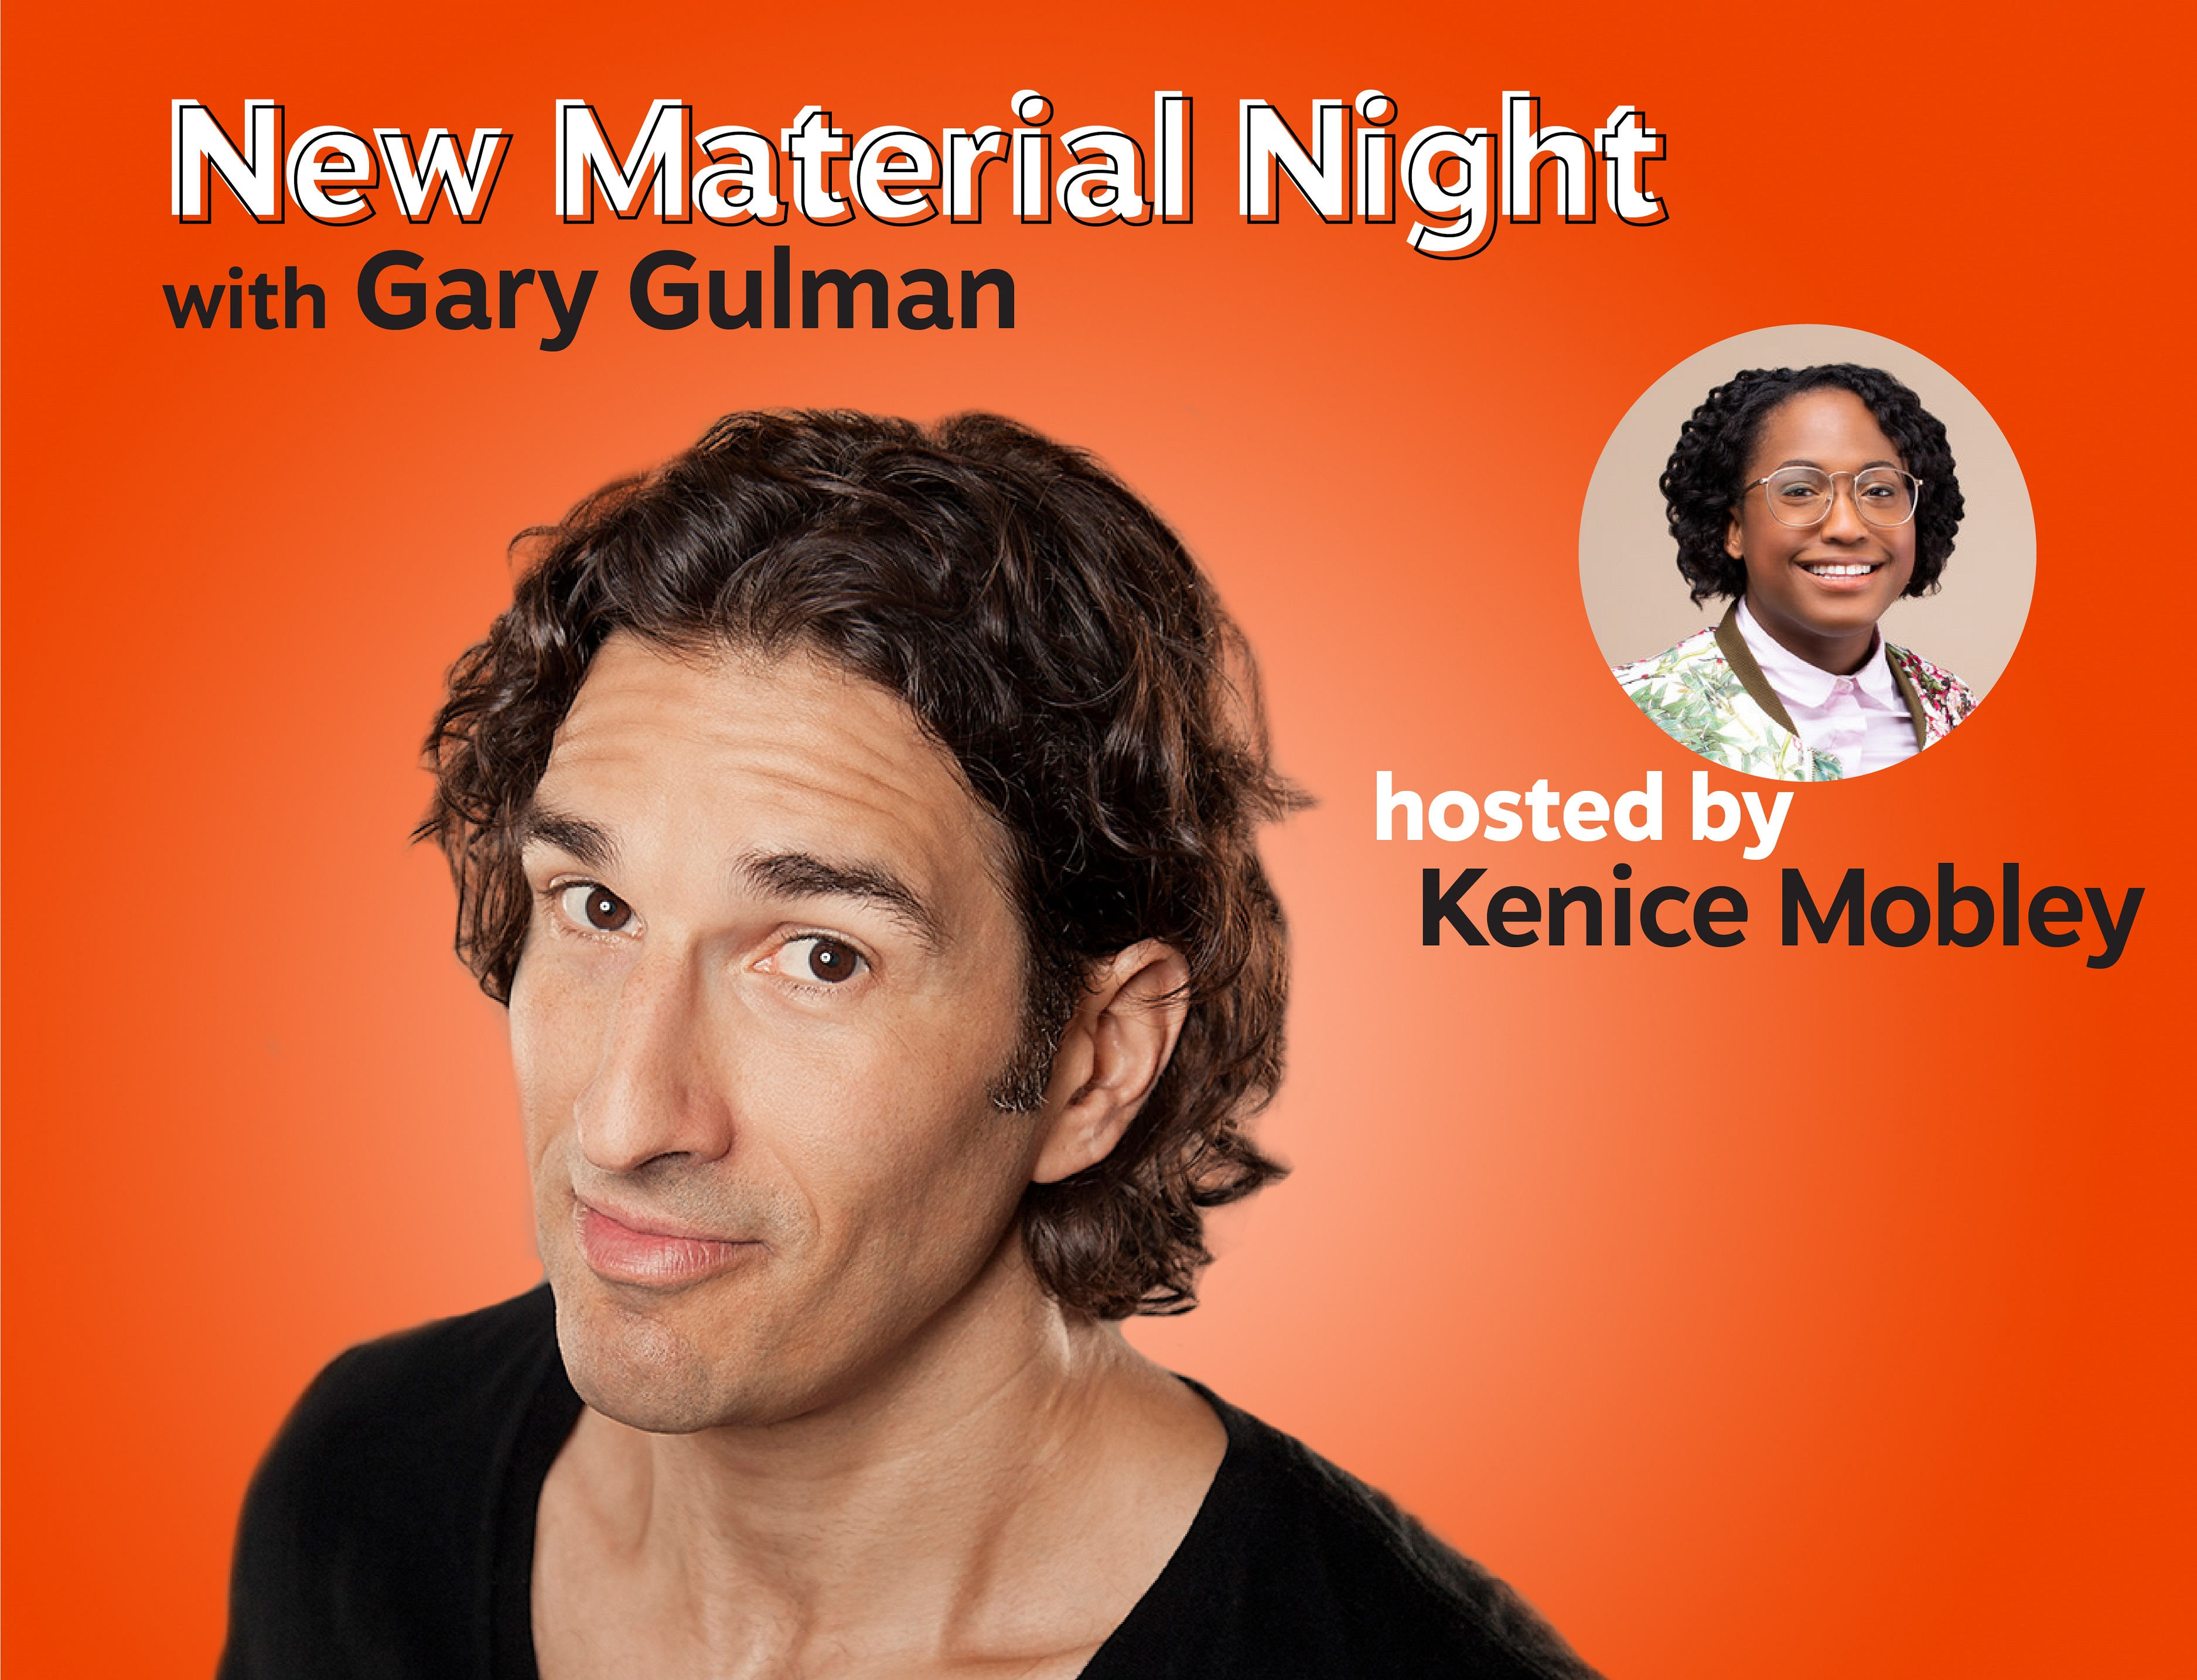 New Material Night with Gary Gulman & Kenice Mobley